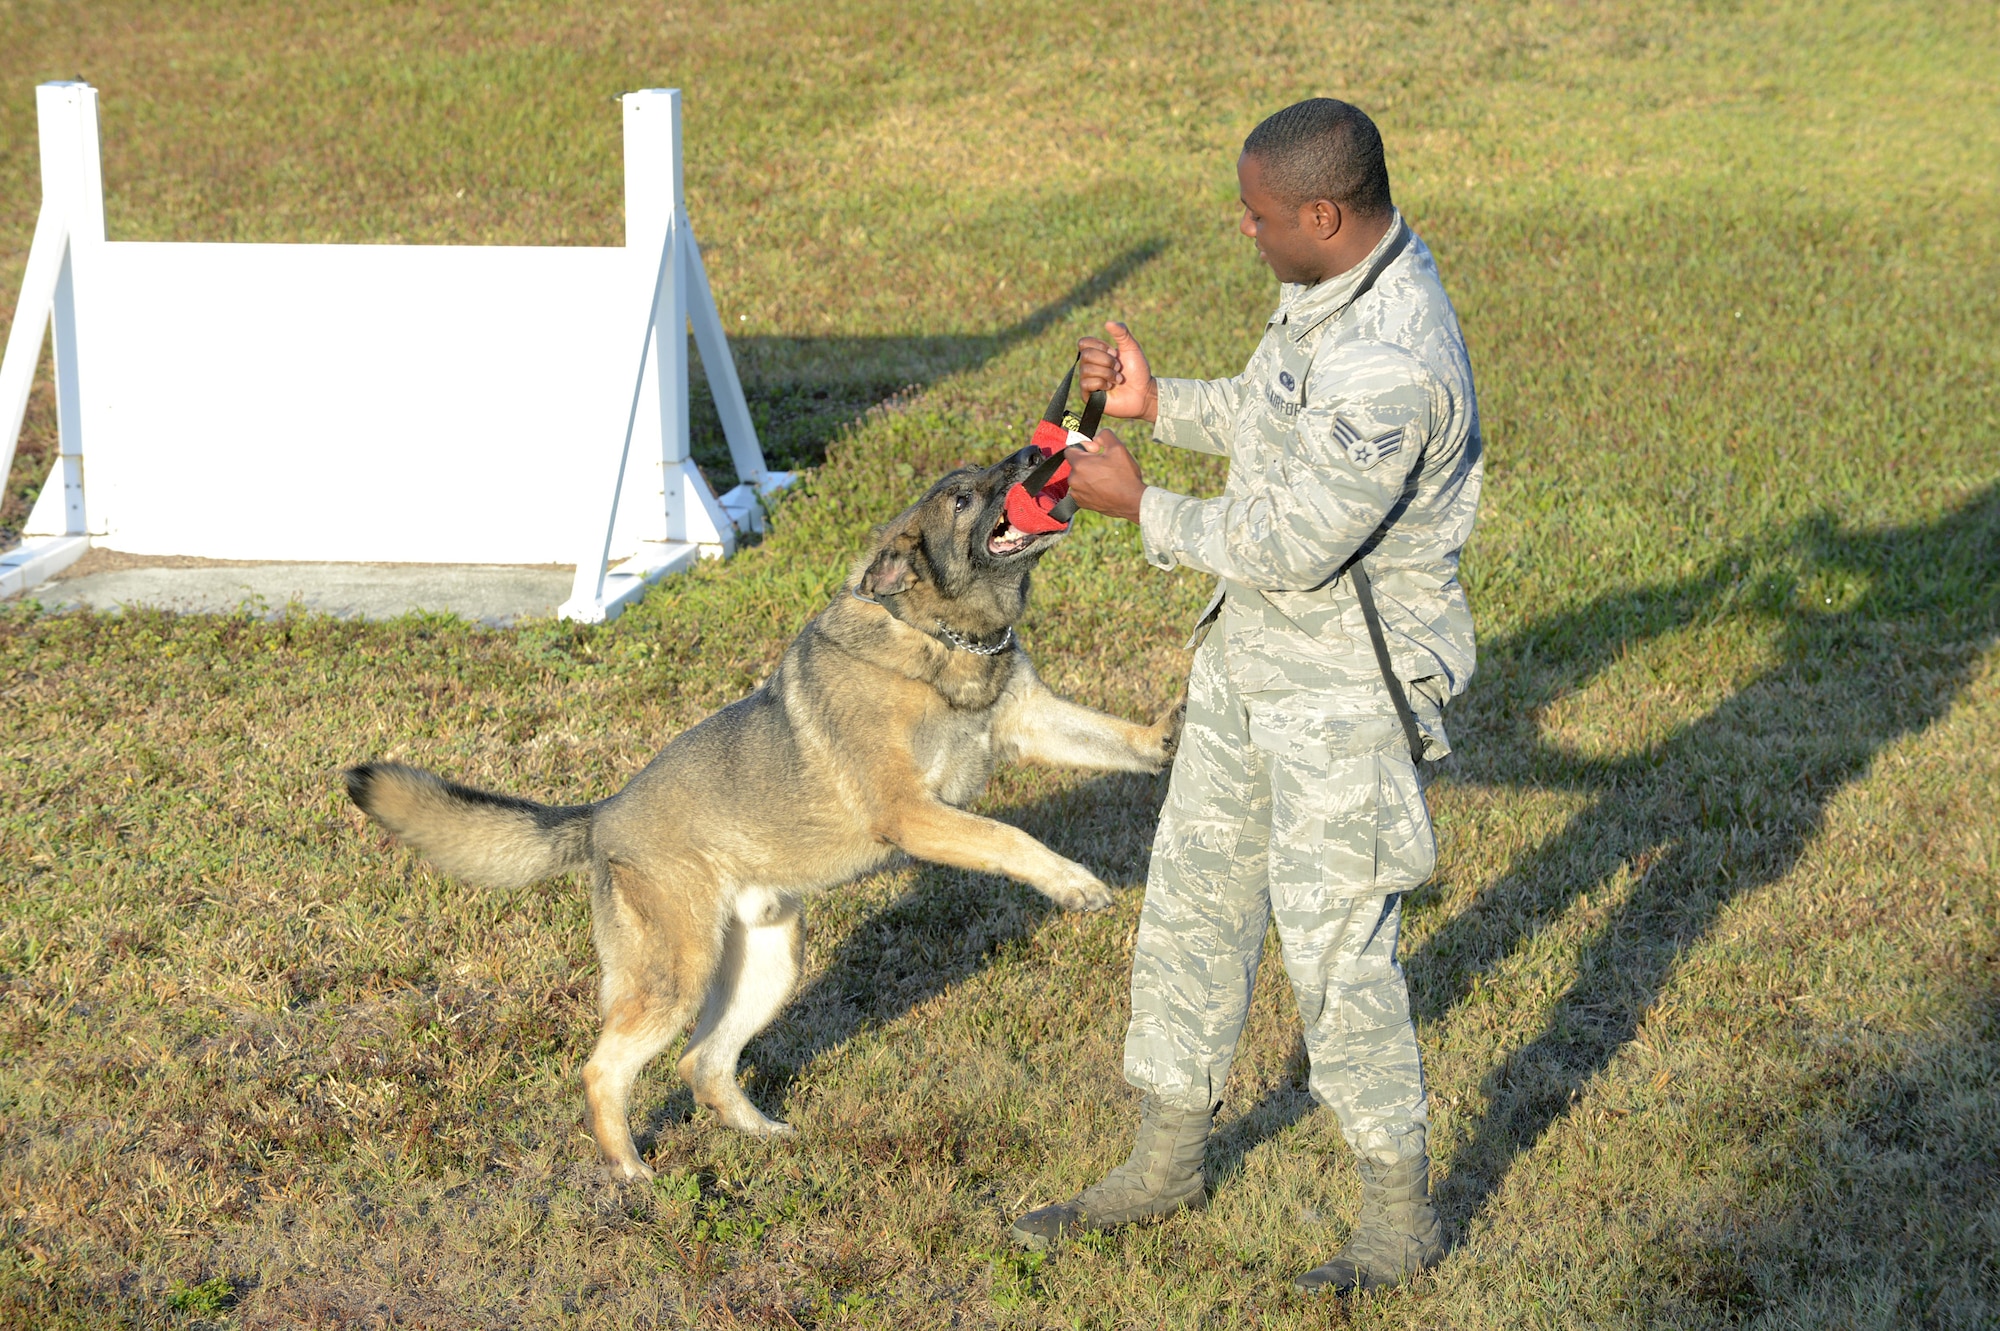 U.S. Air Force Senior Airman Dameion Morris, military working dog (MWD) handler assigned to the 6th Security Forces Squadron, plays tug-a-war with his MWD, Zoran, at MacDill Air Force Base, Fla., March 29, 2017. Zoran retired after seven years of service, and will go to Mission K-9 in Houston, Texas to live out his retirement. (U.S. Air Force photo by Senior Airman Tori Schultz)